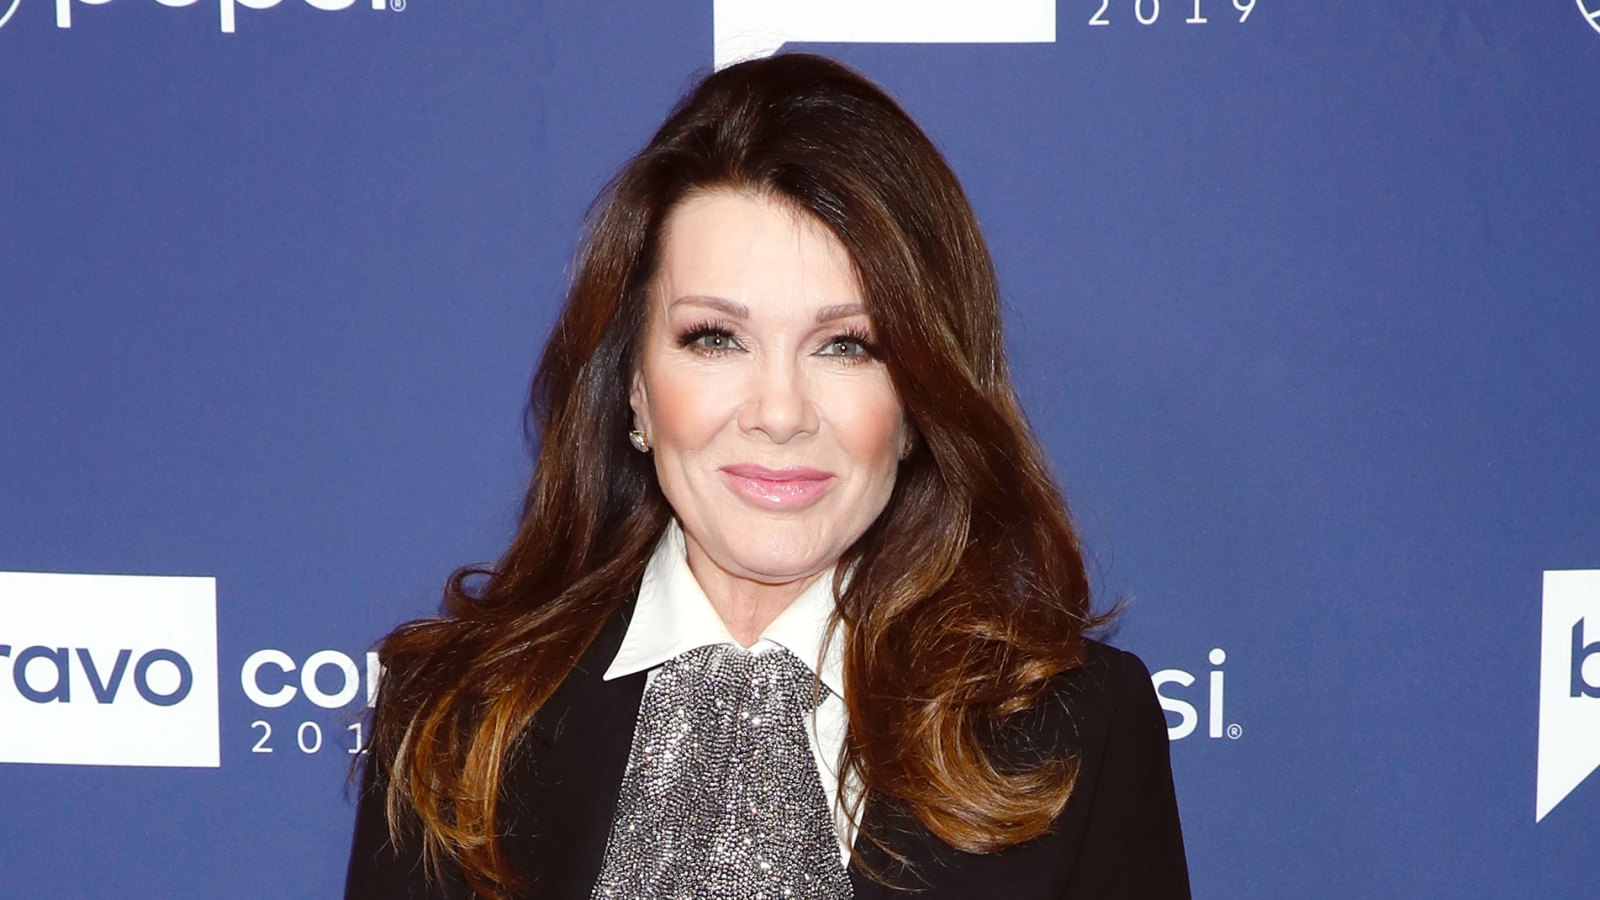 Lisa Vanderpump Denies Report That She Wanted $2 Million for 'Real Housewives of Beverly Hills' Return